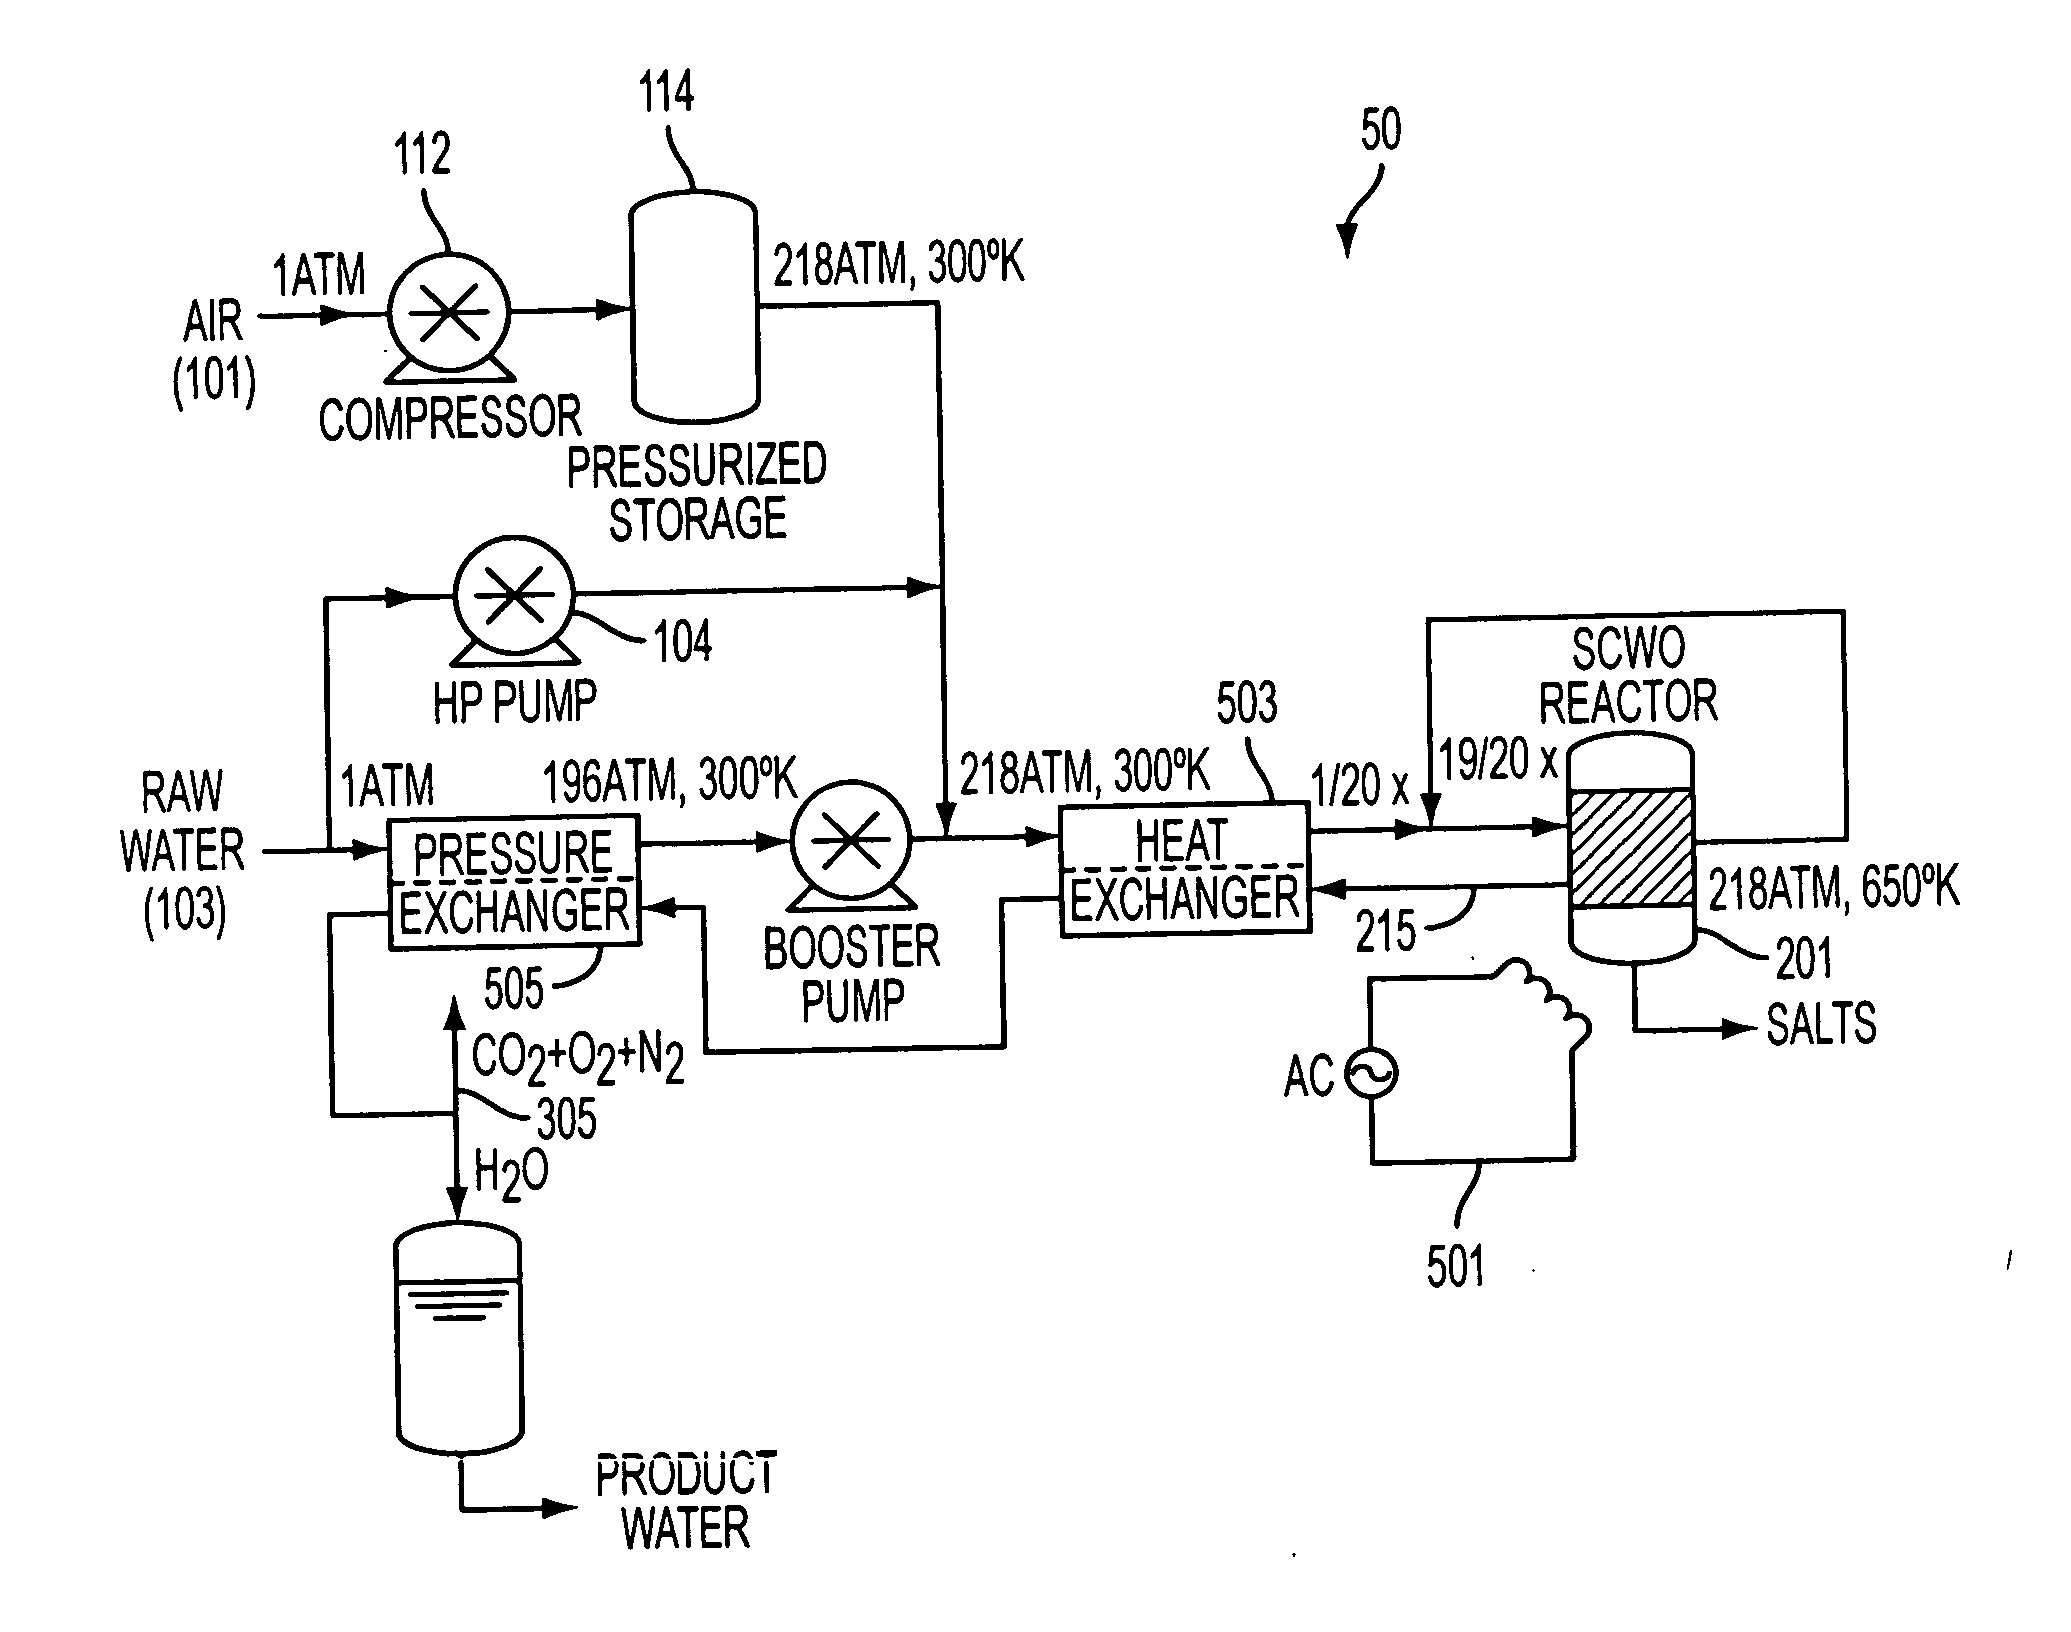 Systems and methods for water purification through supercritical oxidation